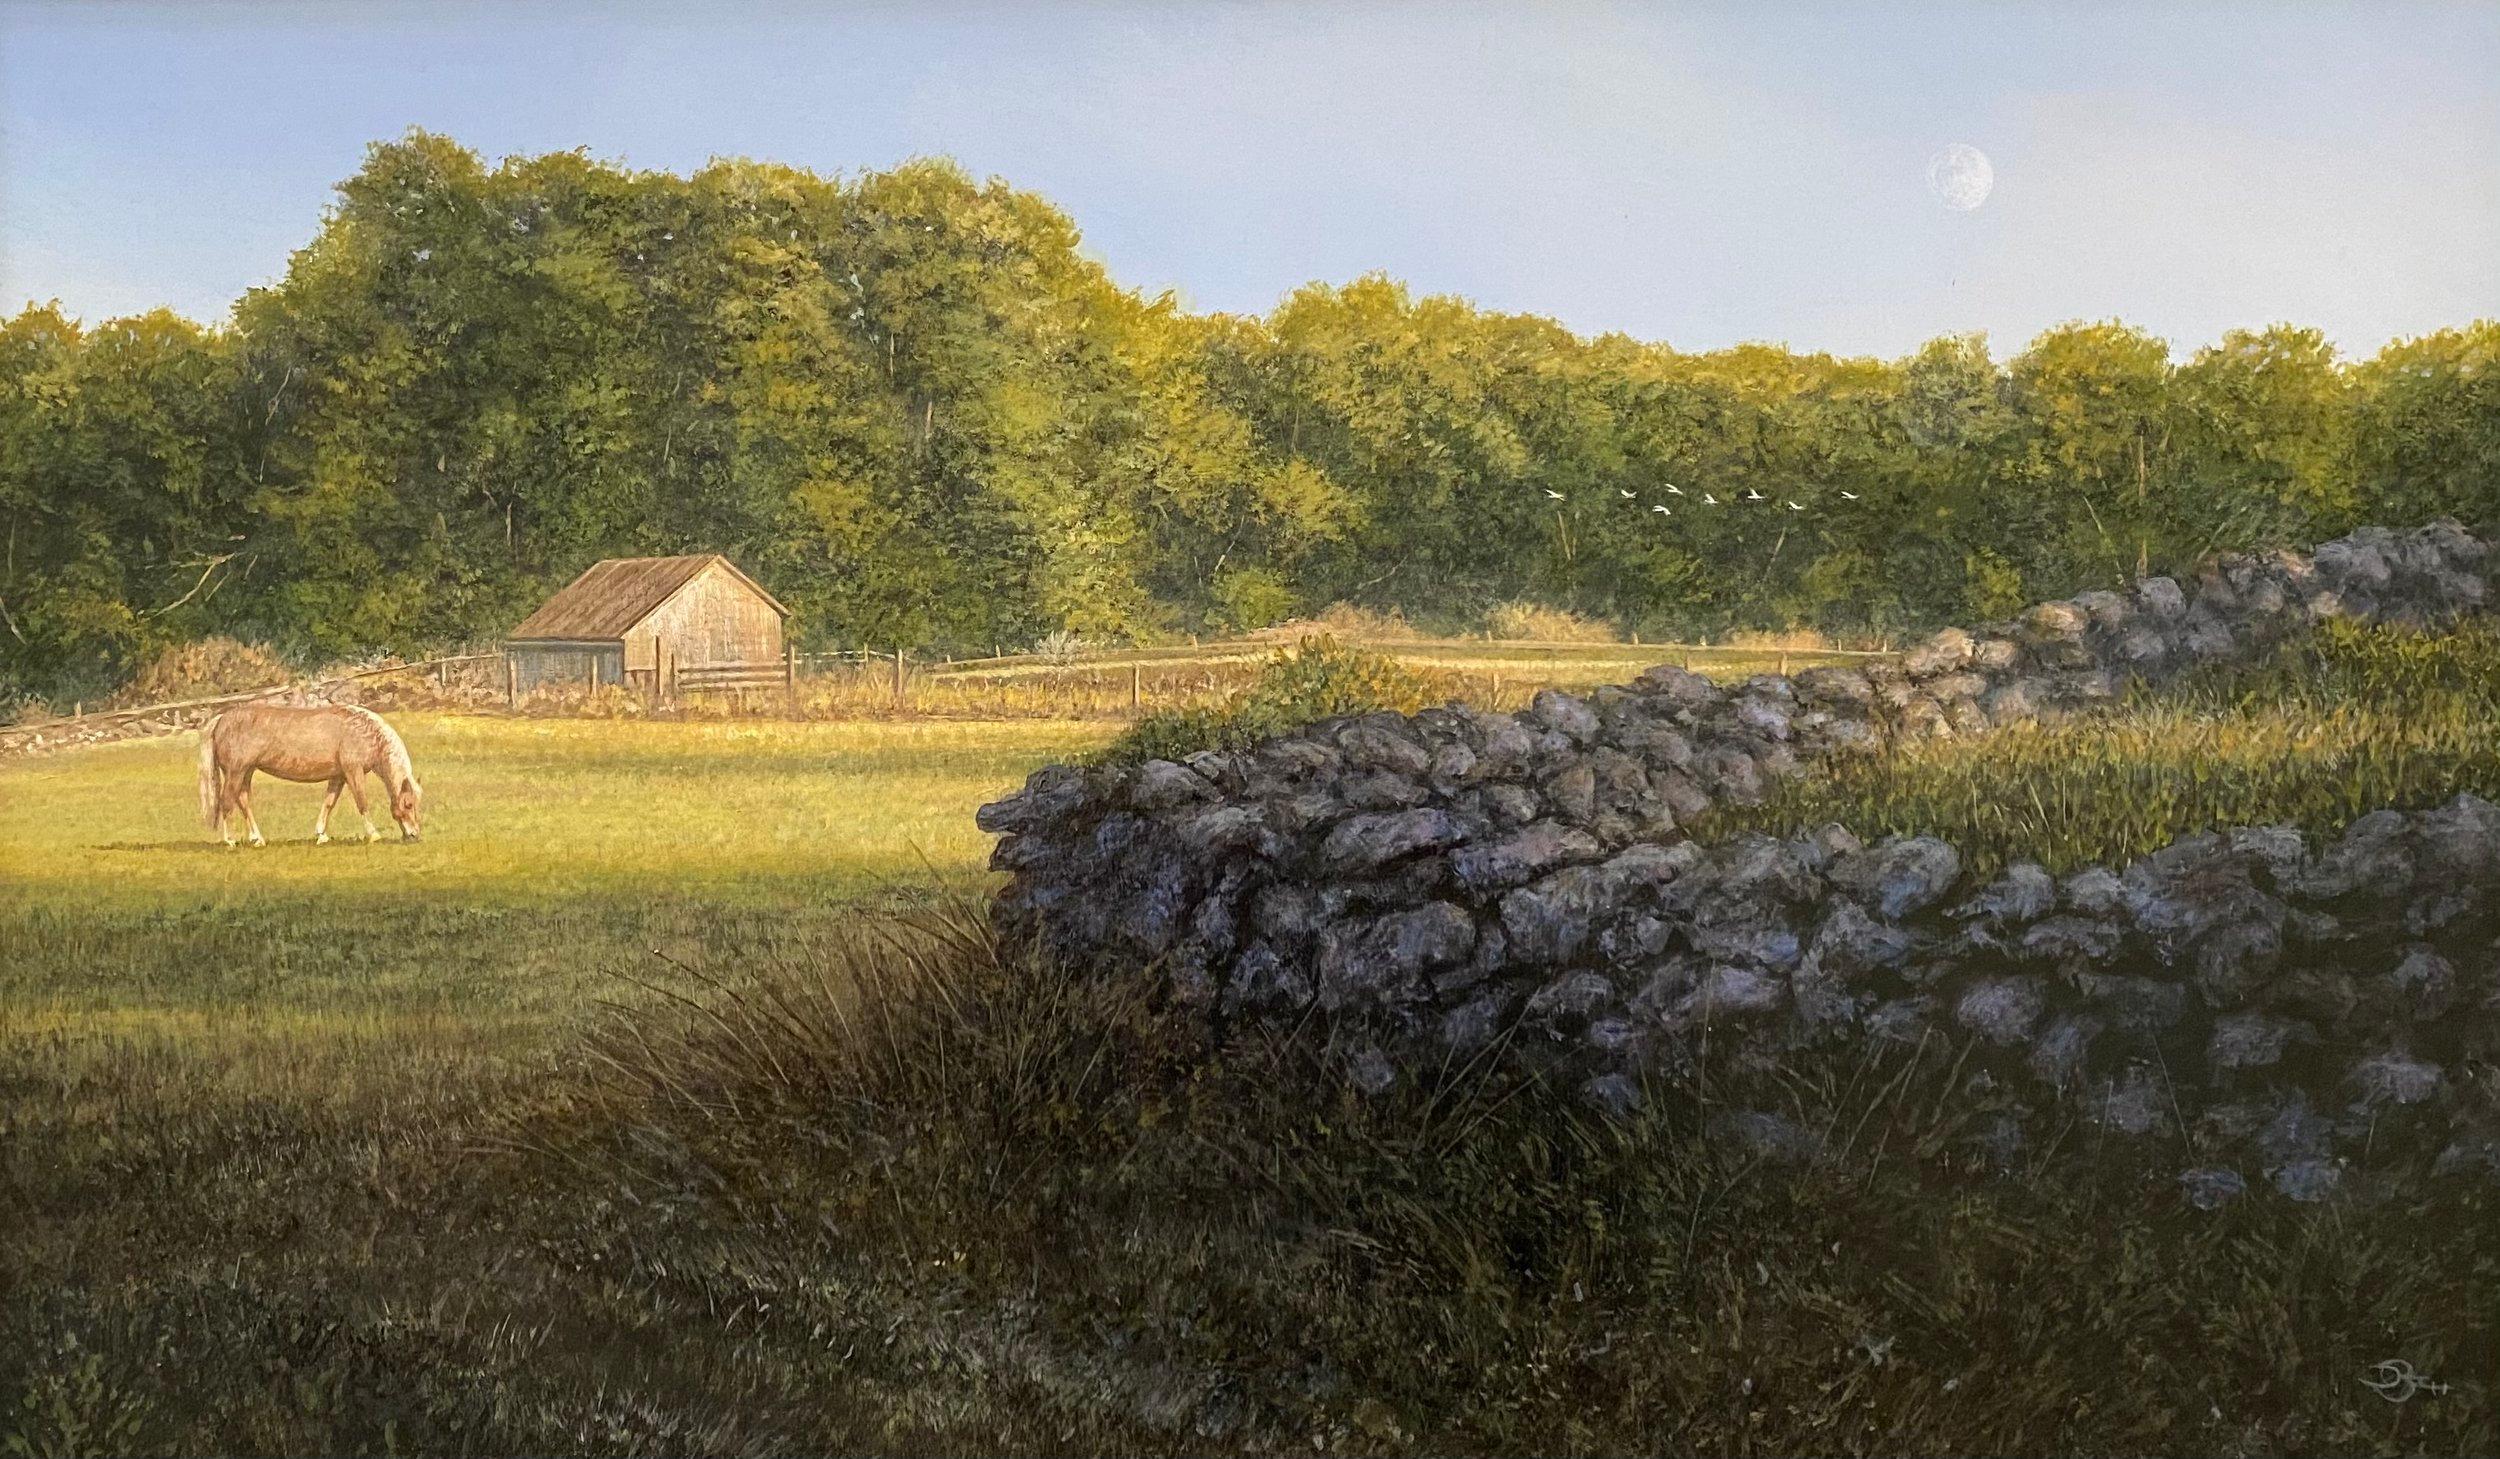 Del Bourree Bach, "A Lazy Summer Day", Horse Equine Pasture Barn Painting